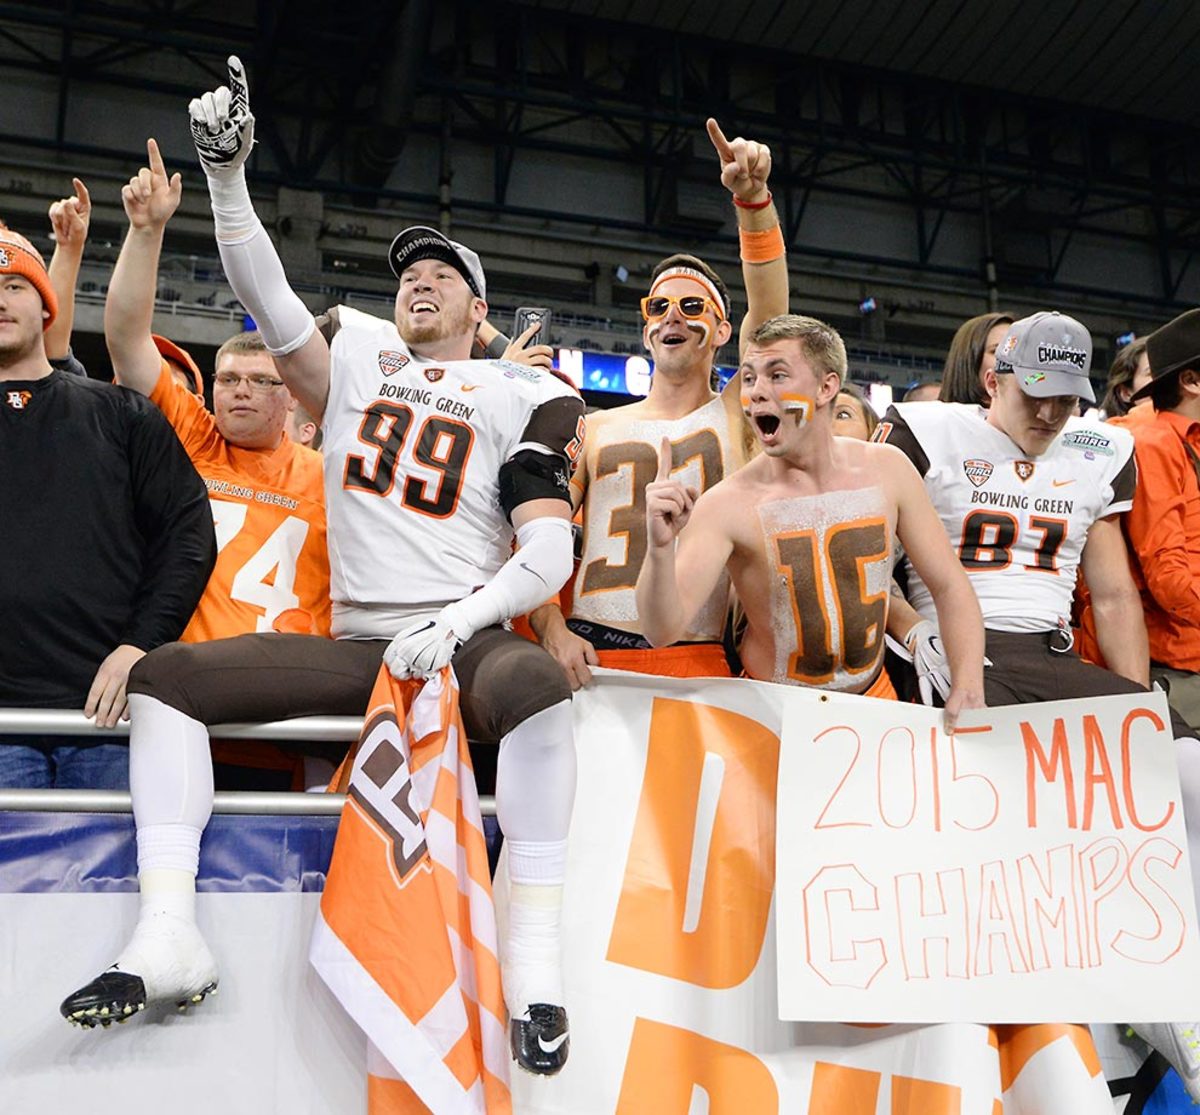 bowling-green-college-fans-499994834_master.jpg